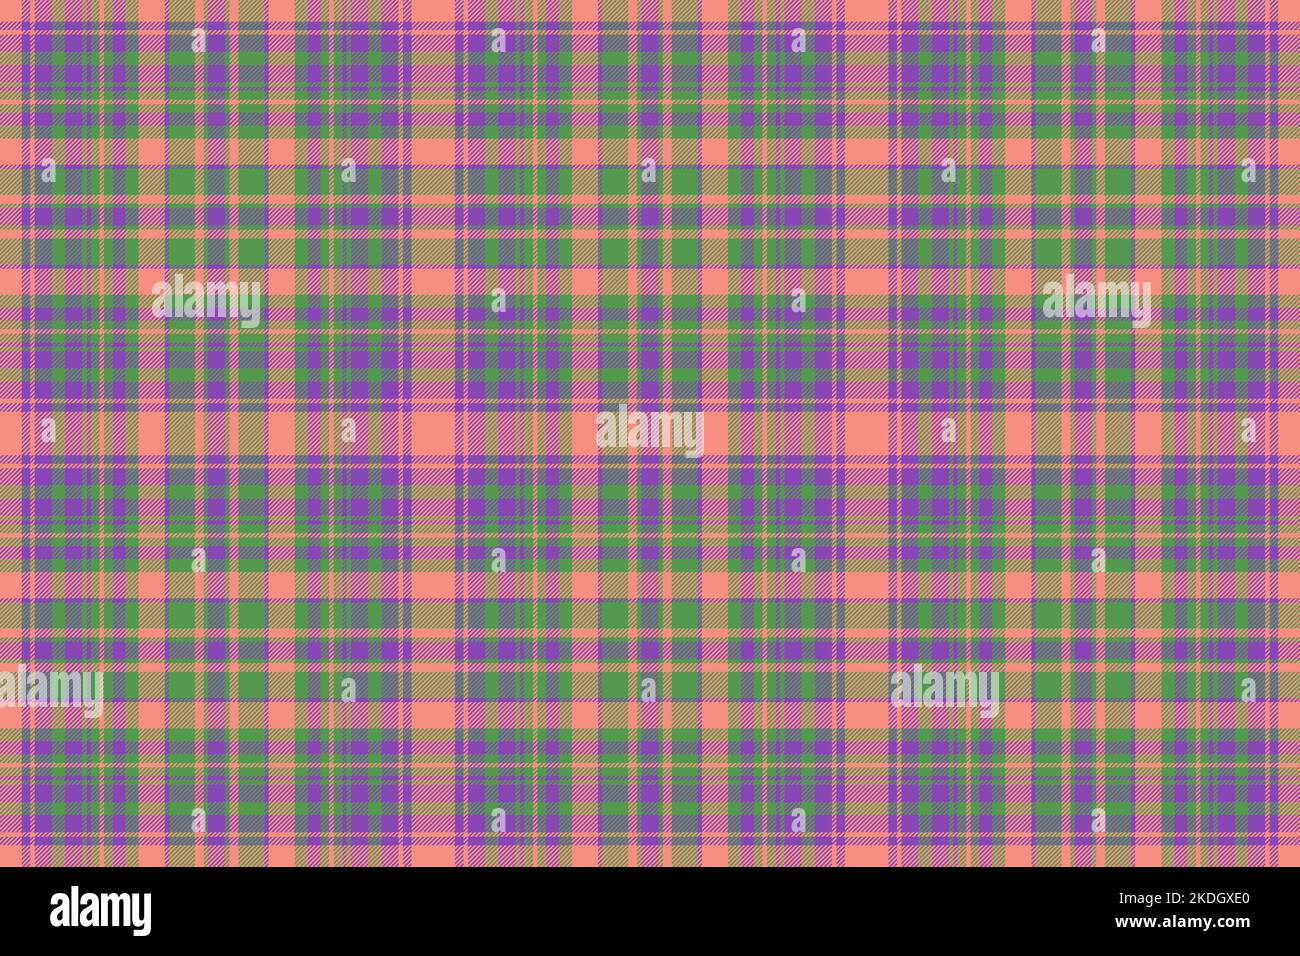 Plaid tartan texture. Check pattern seamless. Vector fabric background textile in red and green colors. Stock Vector